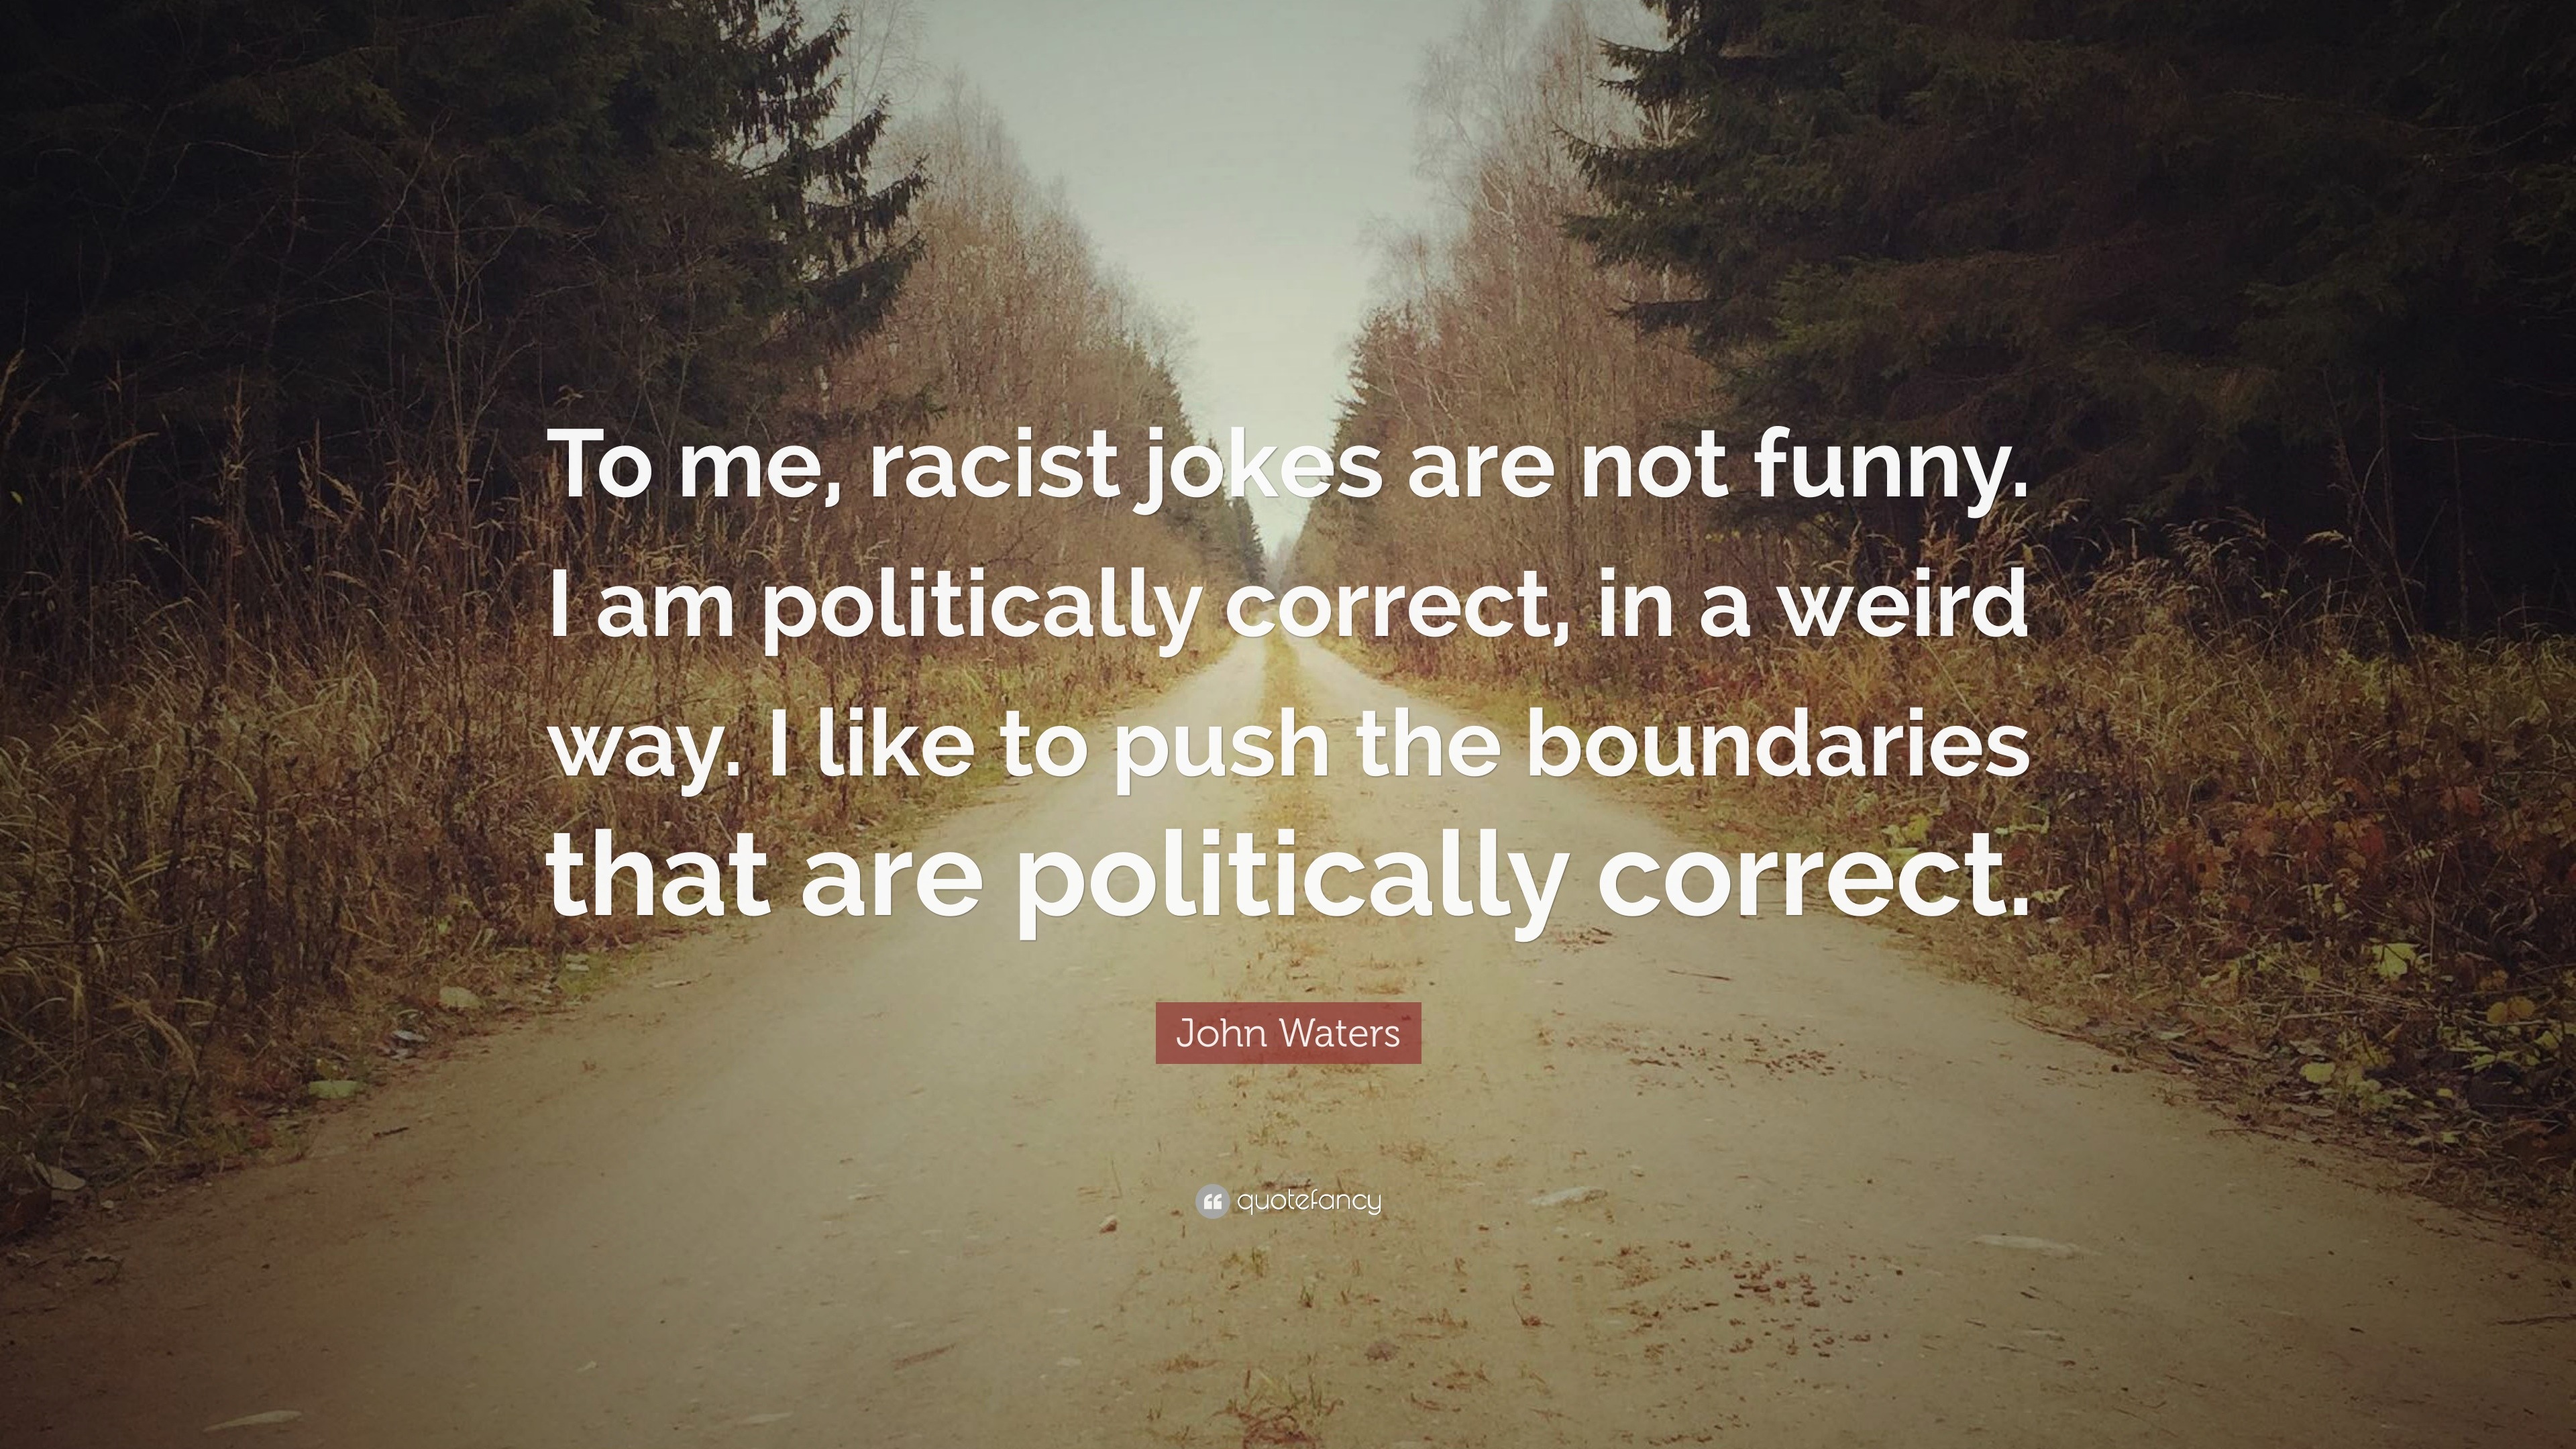 John Waters Quote: “To me, racist jokes are not funny. I am politically  correct, in a weird way. I like to push the boundaries that are poli...”